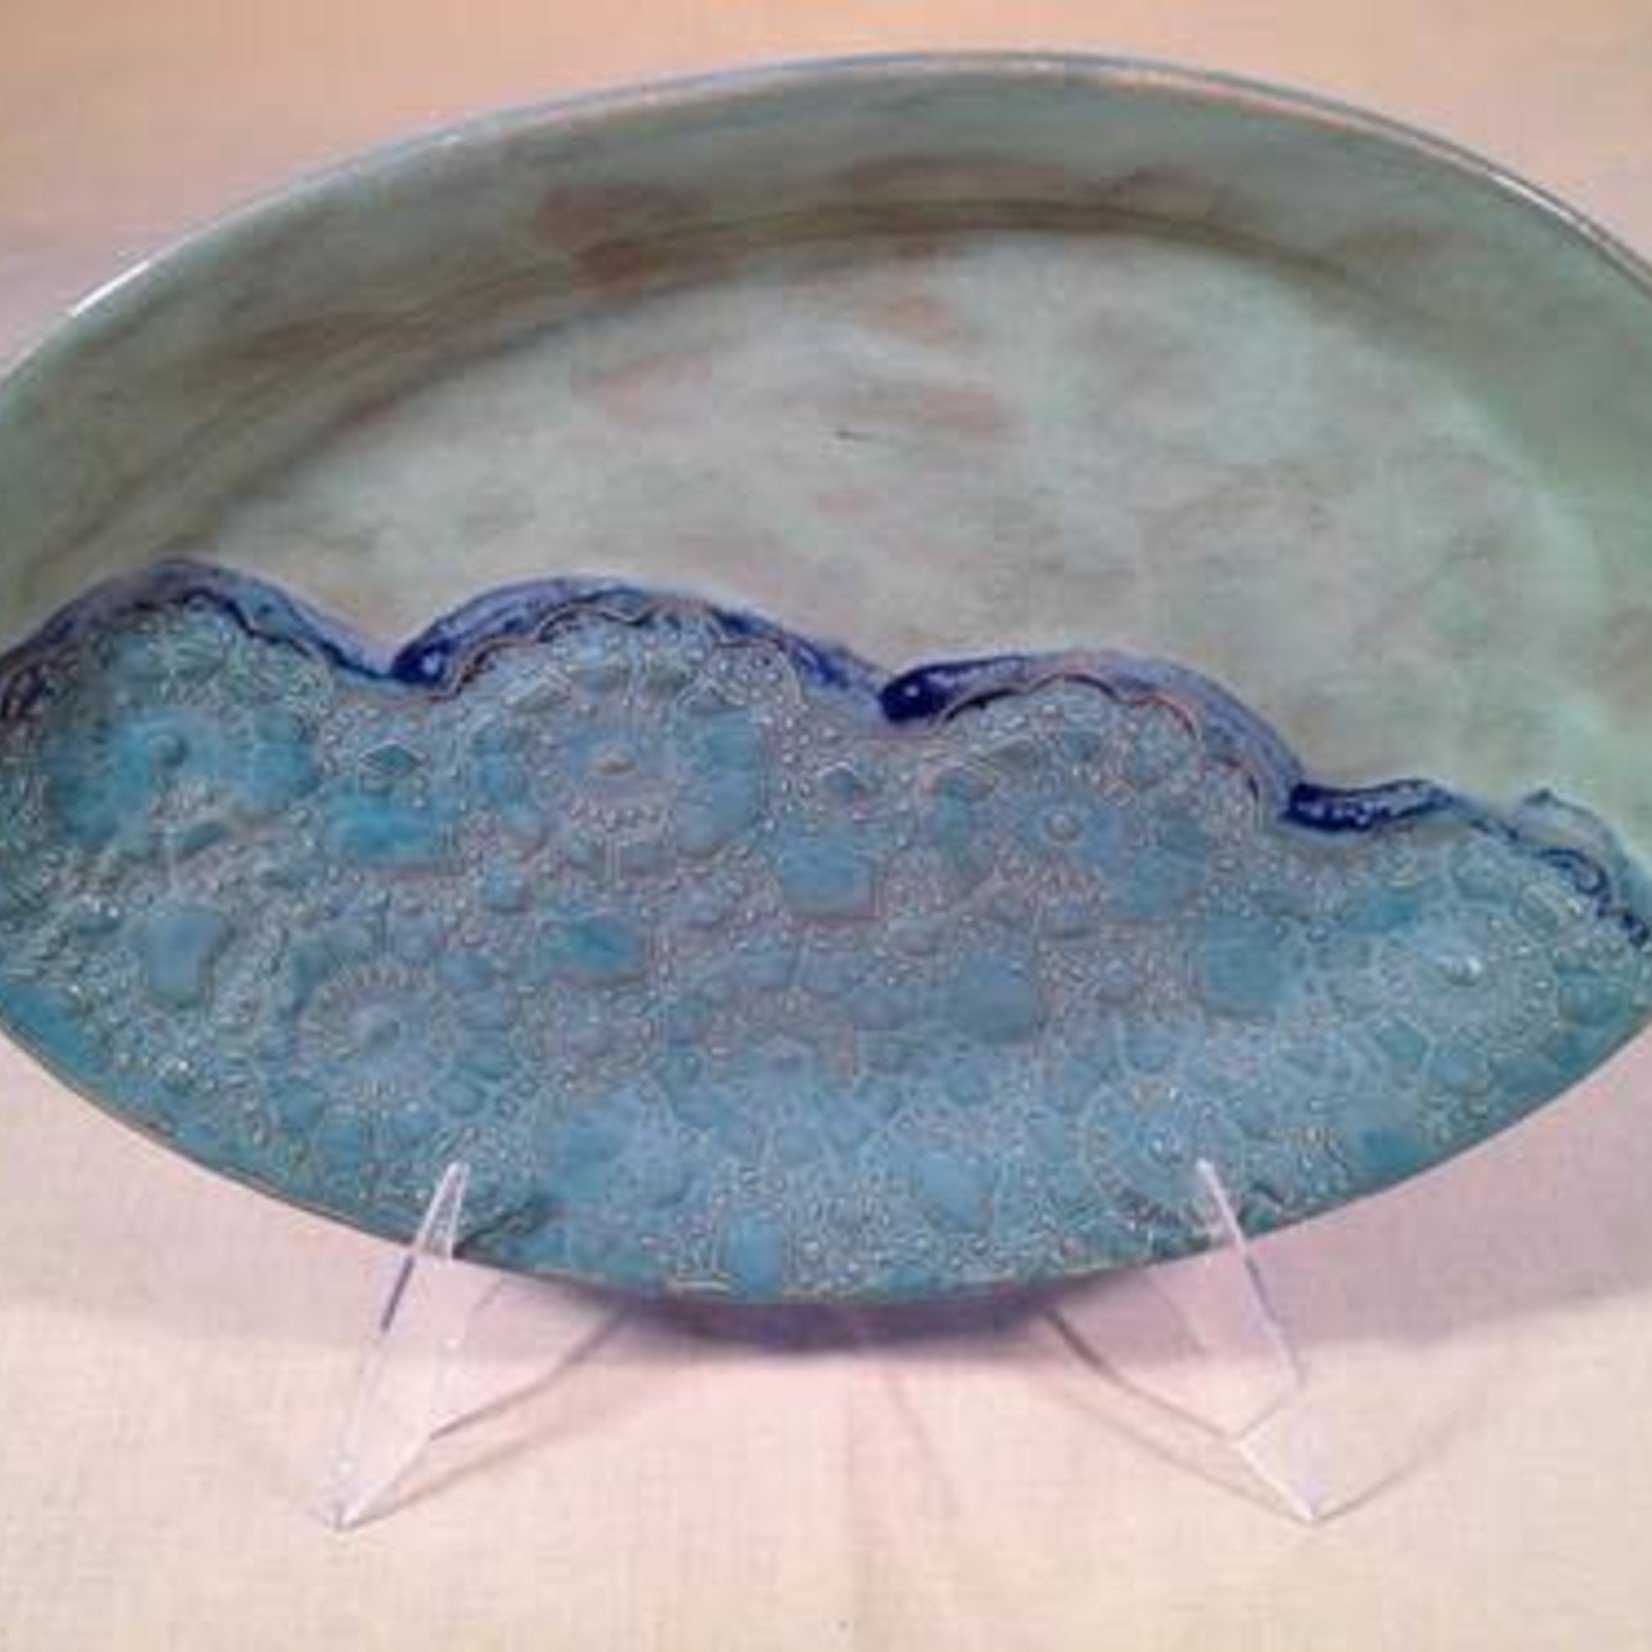 Clarkware Pottery Large Oval Serving Bowl, Blue or Elegant Lace, 9x13", CLARK